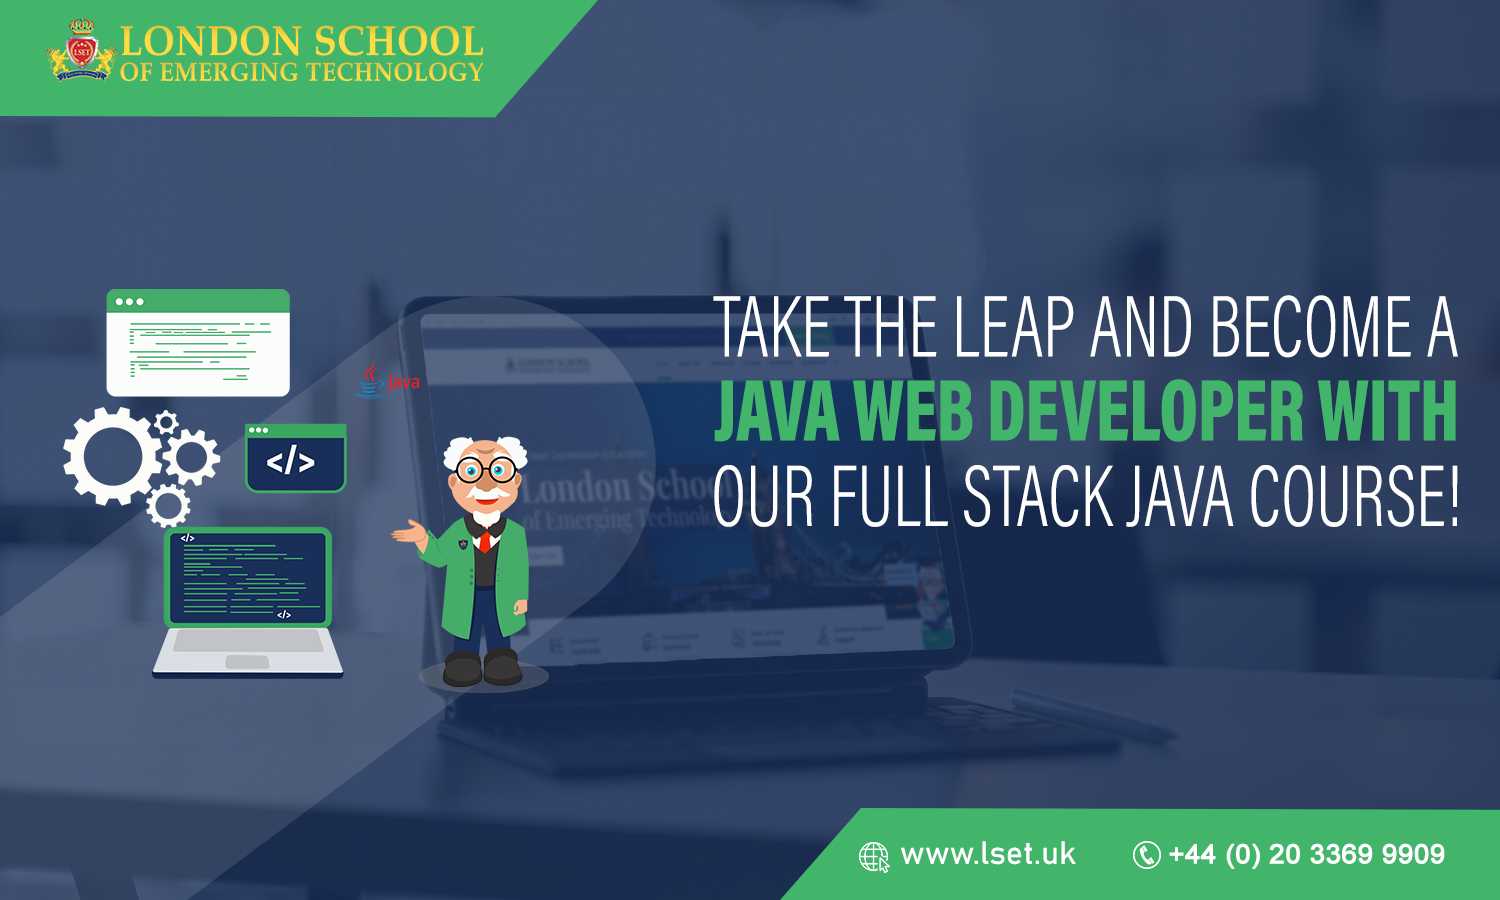 Take the Leap and Become a Java Web Developer with Our Full Stack Java Course!